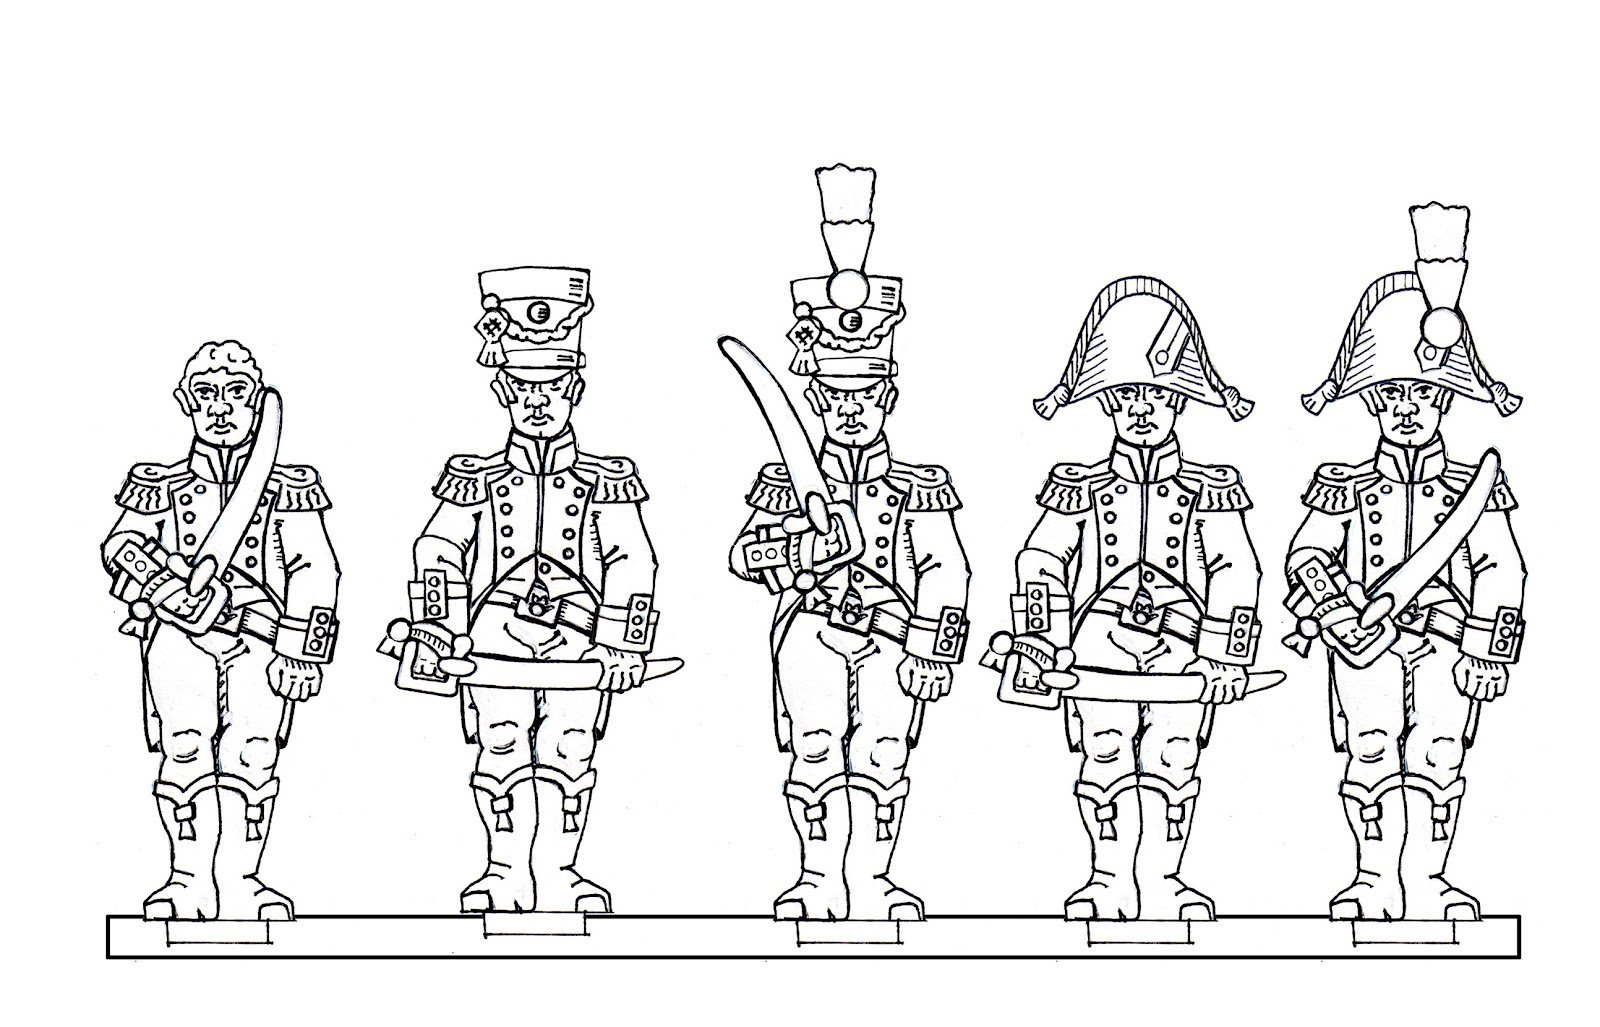 Boys toy soldiers #9